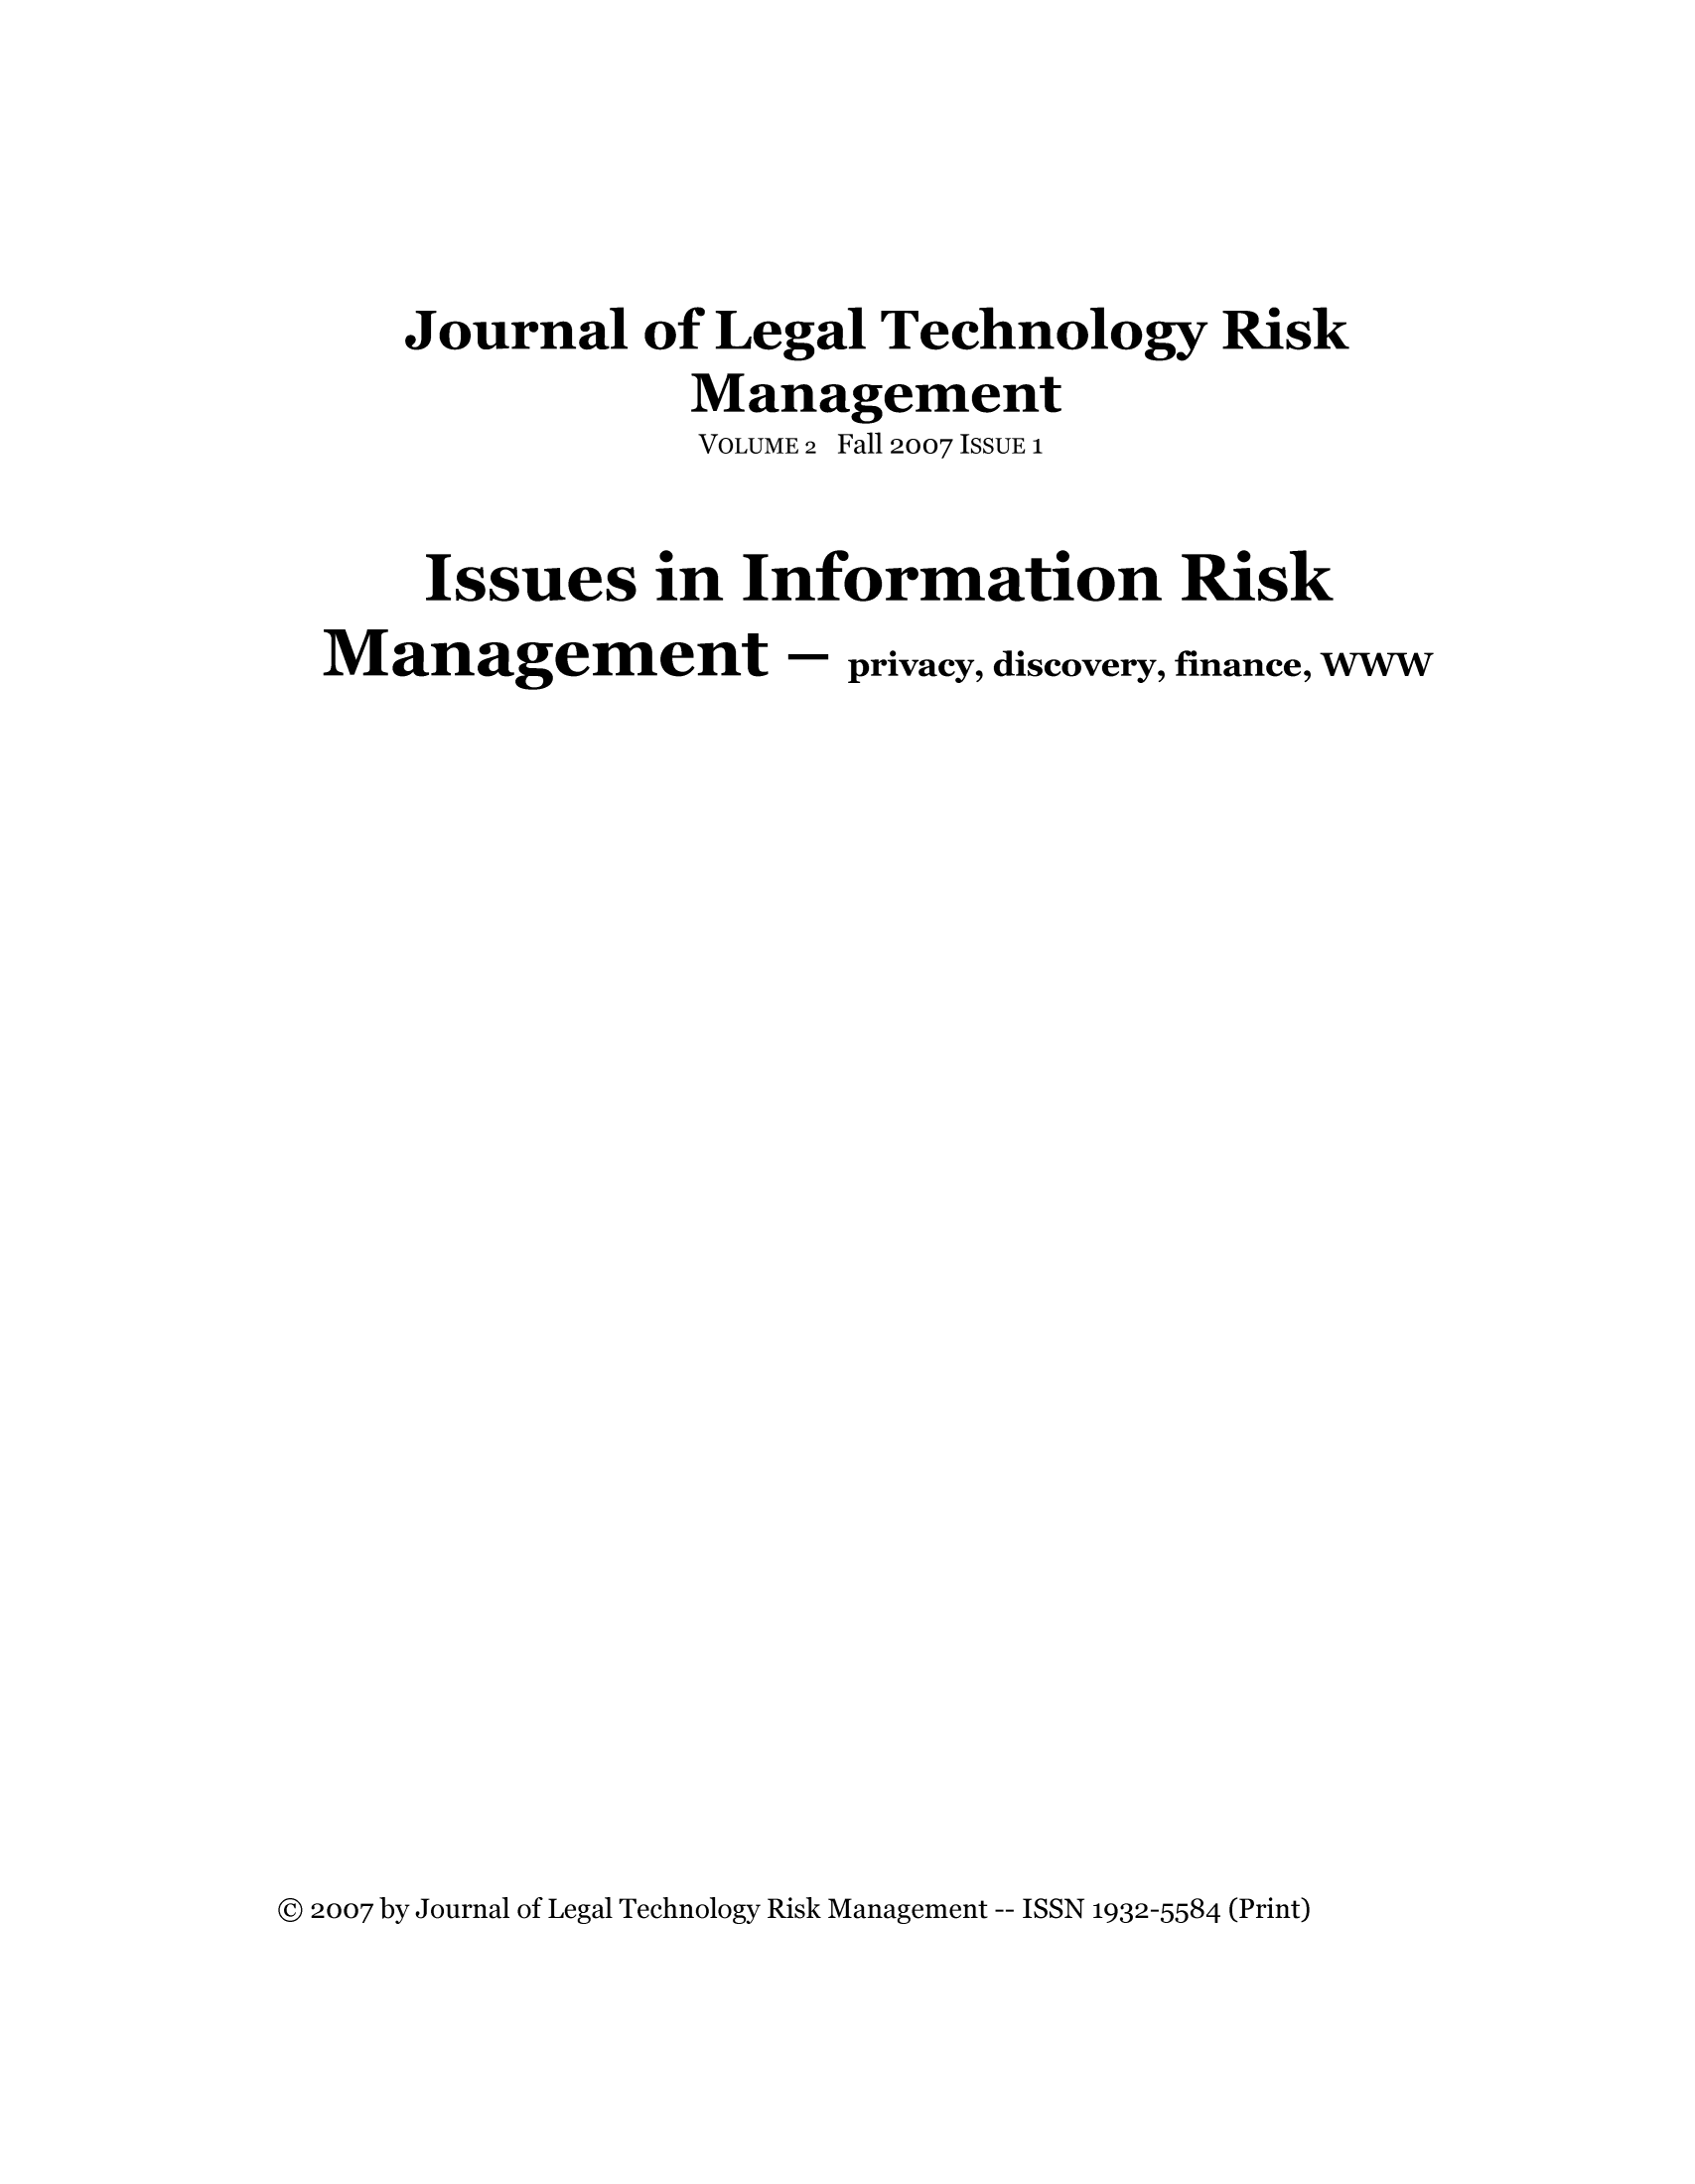 handle is hein.journals/jrlgtrkm2 and id is 1 raw text is: ï»¿Journal of Legal Technology RiskManagementVOLUME 2 Fall 2007 ISSUE 1Issues in Information RiskManagement - privacy, discovery, finance, WWWÂ© 2007 by Journal of Legal Technology Risk Management -- ISSN 1932-5584 (Print)